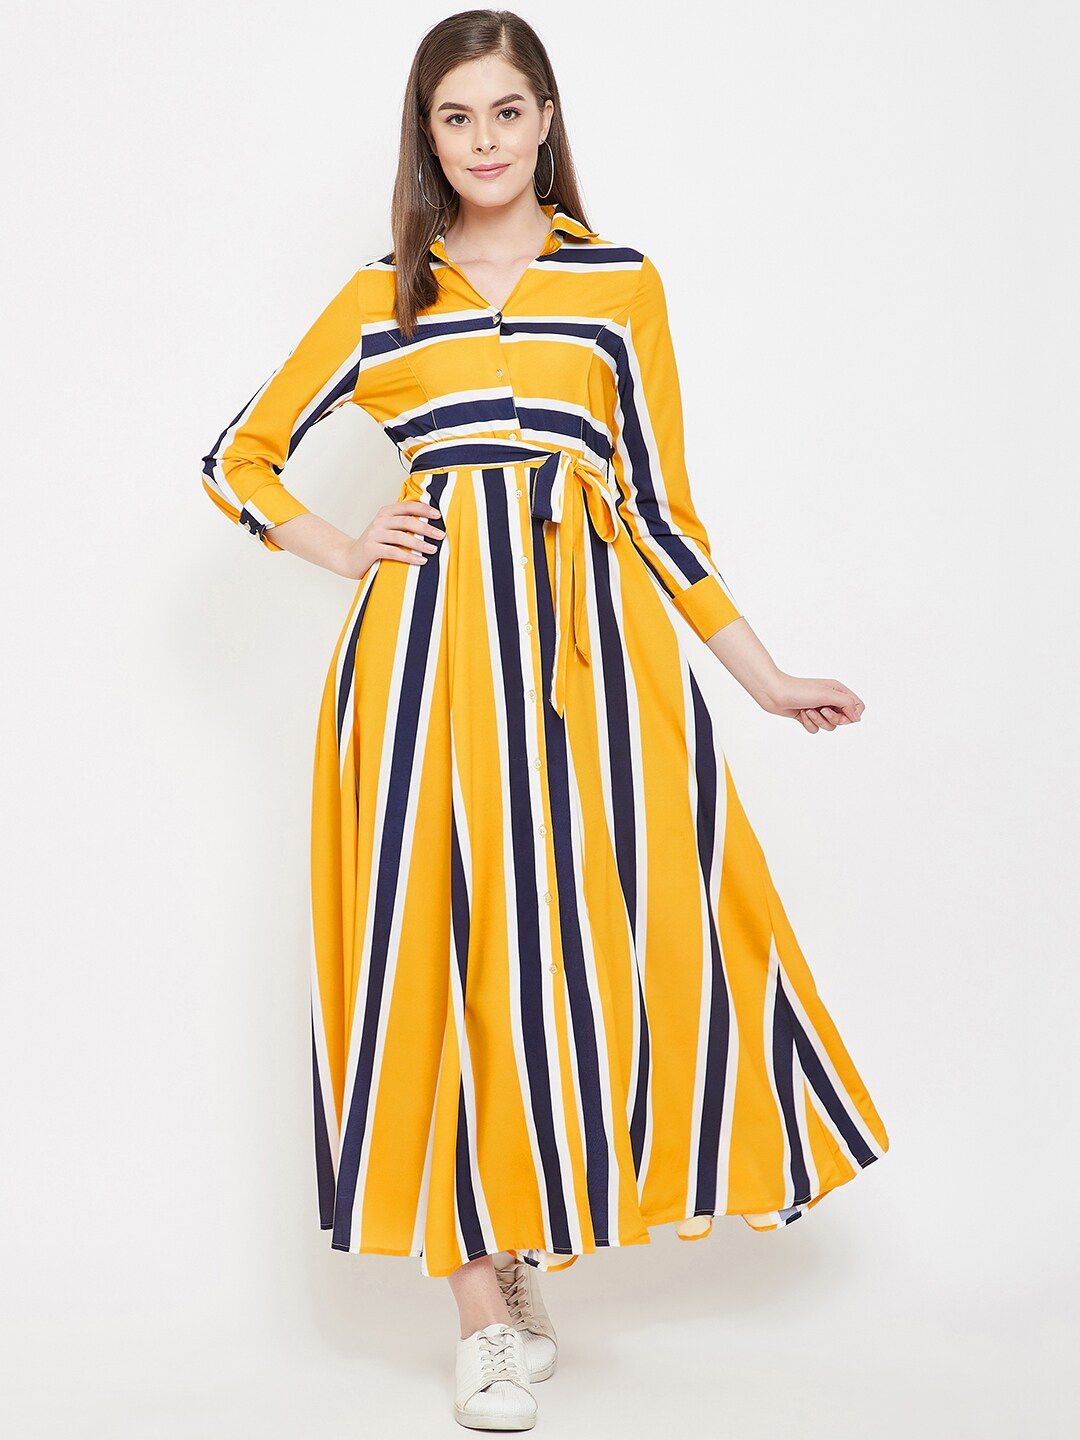 PANIT Yellow Striped Crepe Maxi Dress Price in India